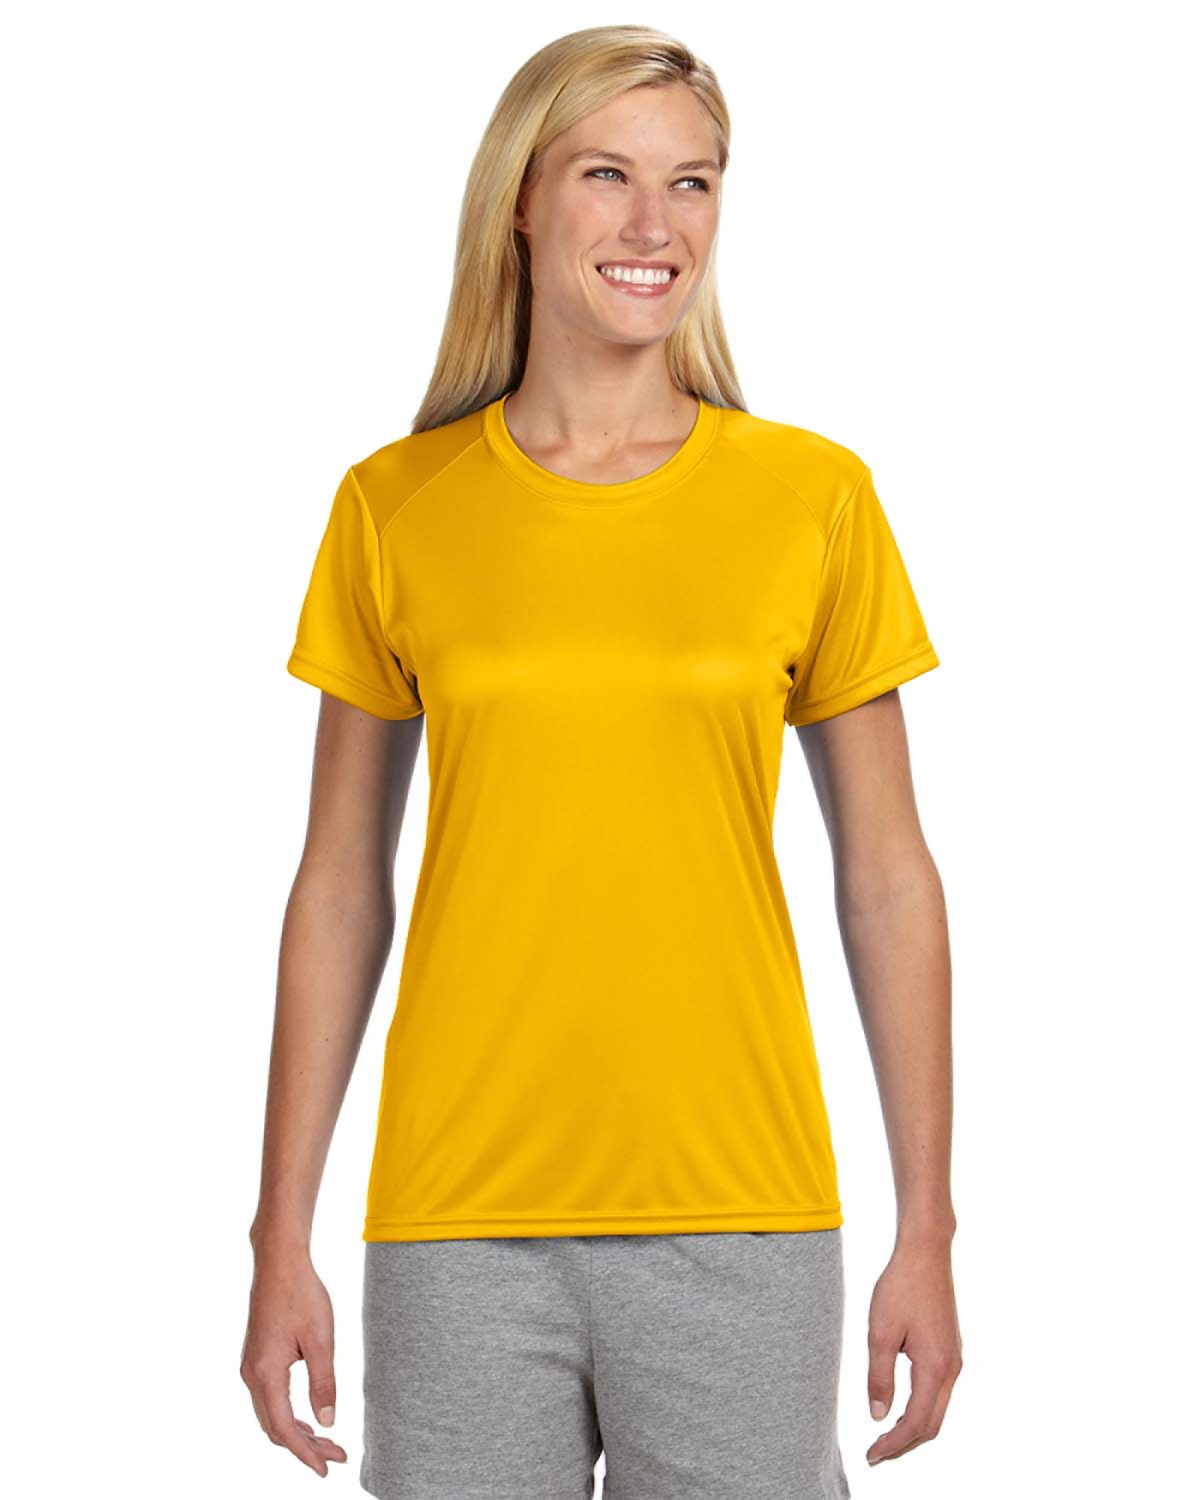 A4 NW3201 - Ladies' Cooling Performance Tee $6.43